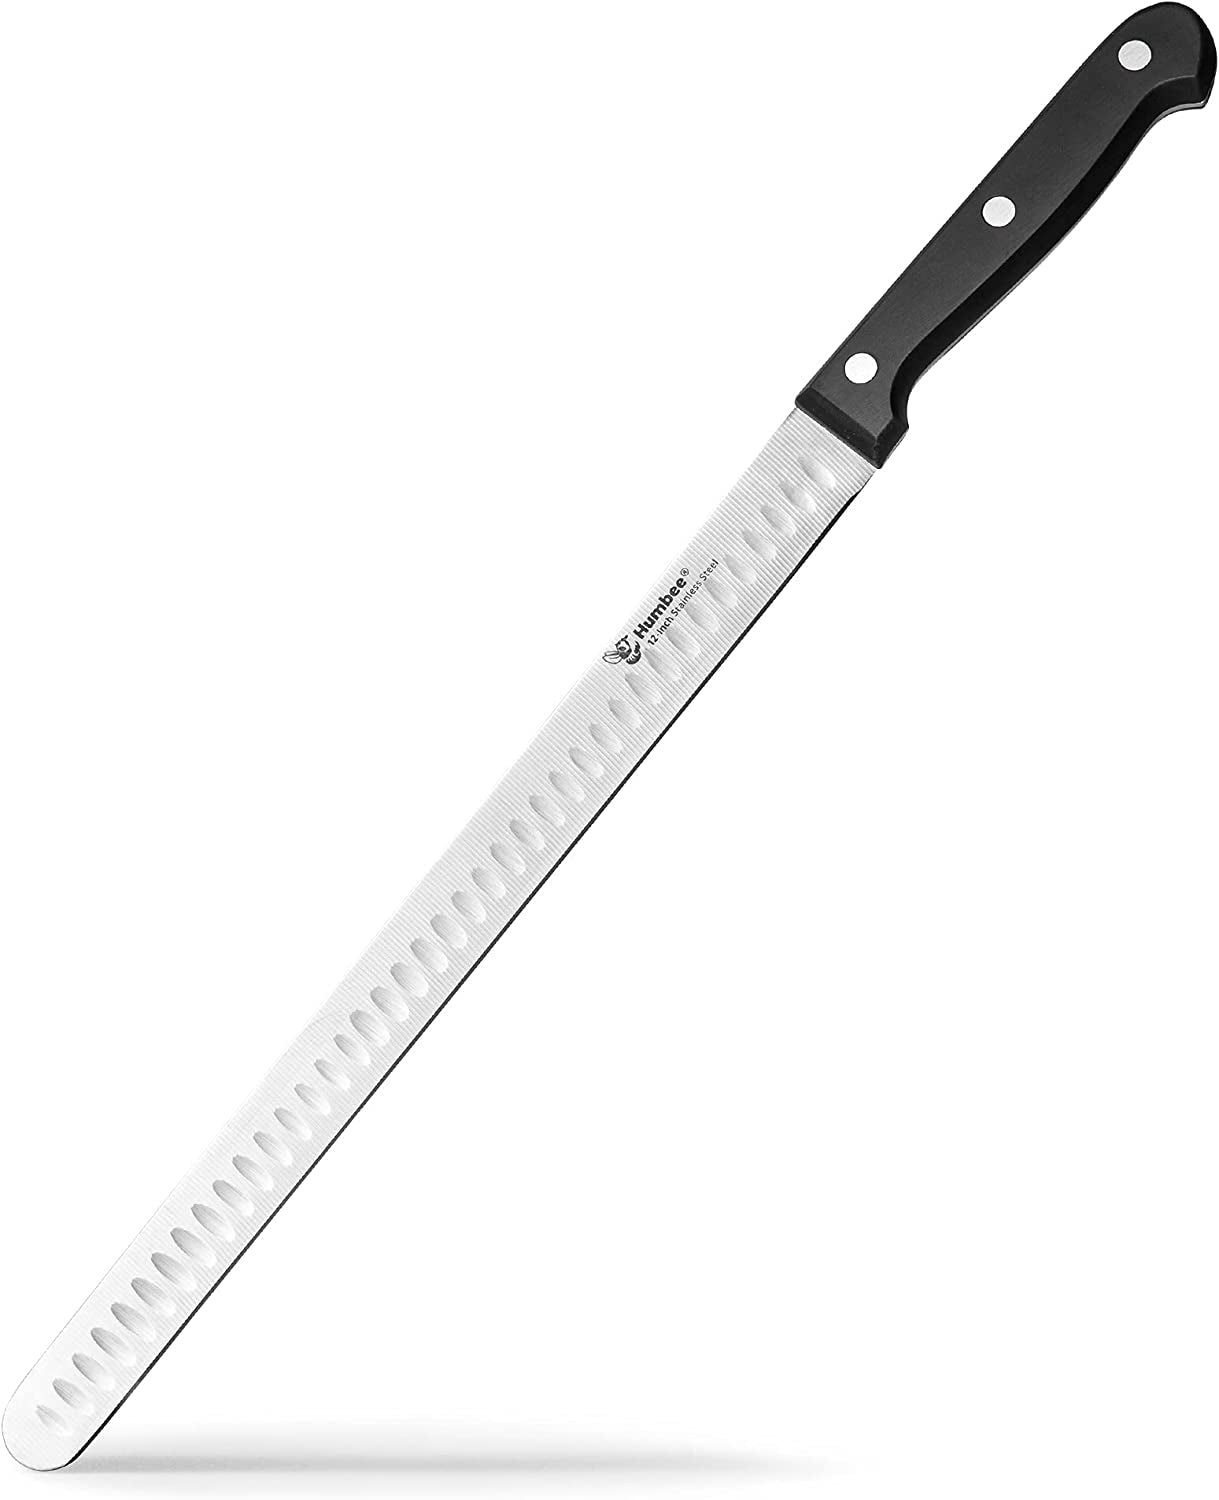 Chef Carving Knife with Granton Edge for Home Kitchens Carving Knife 12 Inch Black